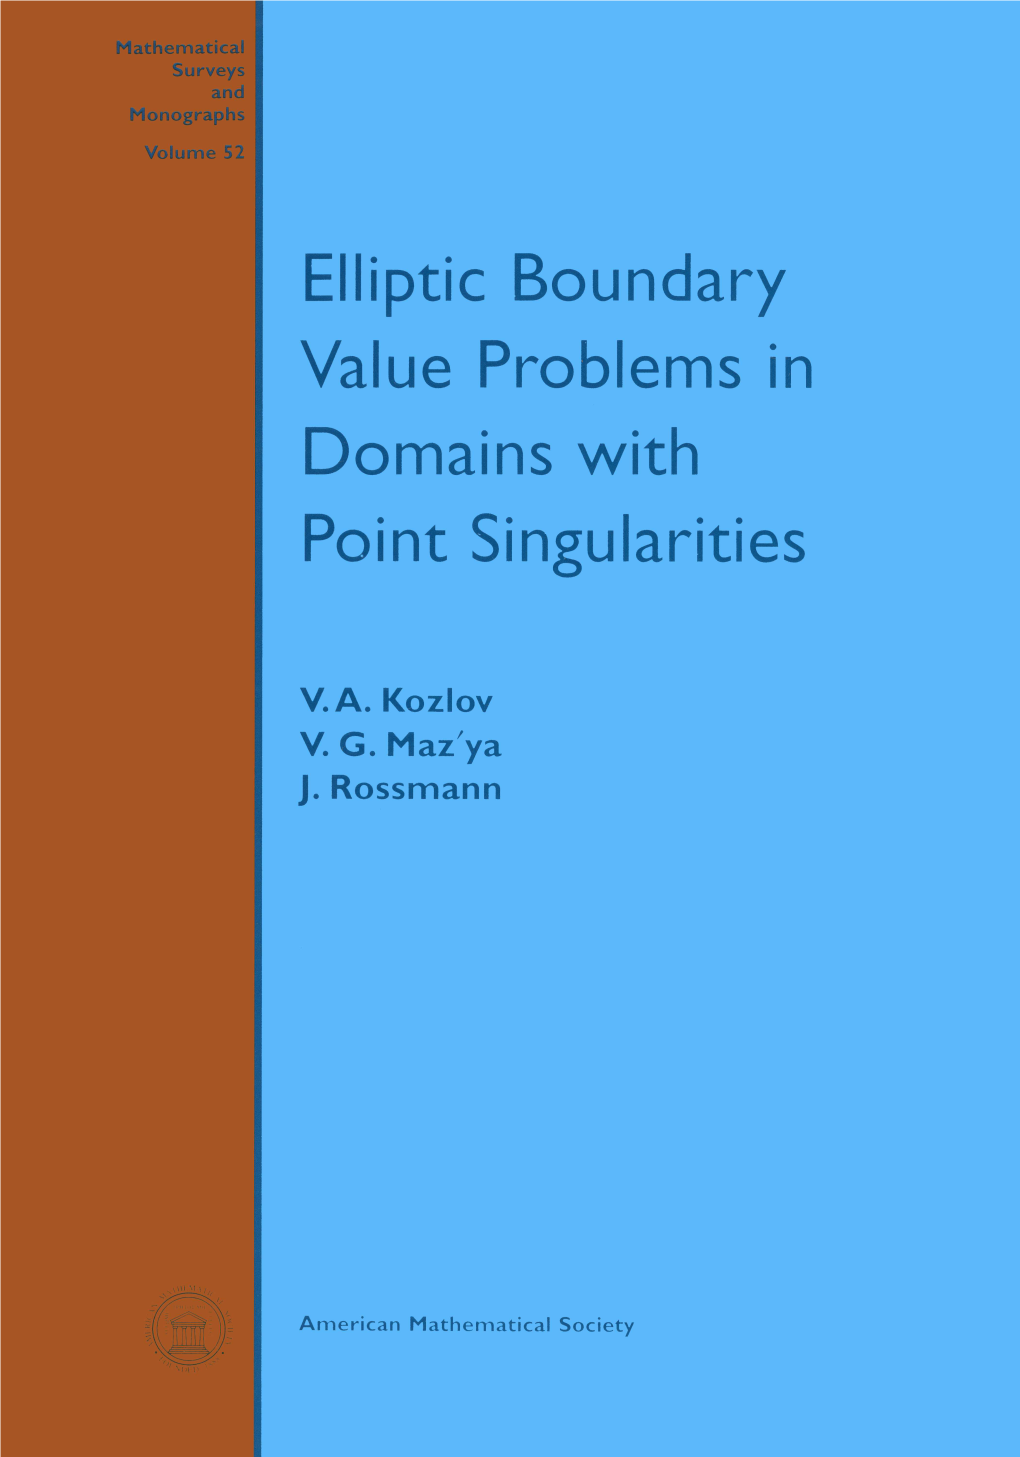 Elliptic Boundary Value Problems in Domains with Point Singularities, 1997 51 Jan Maly and William P